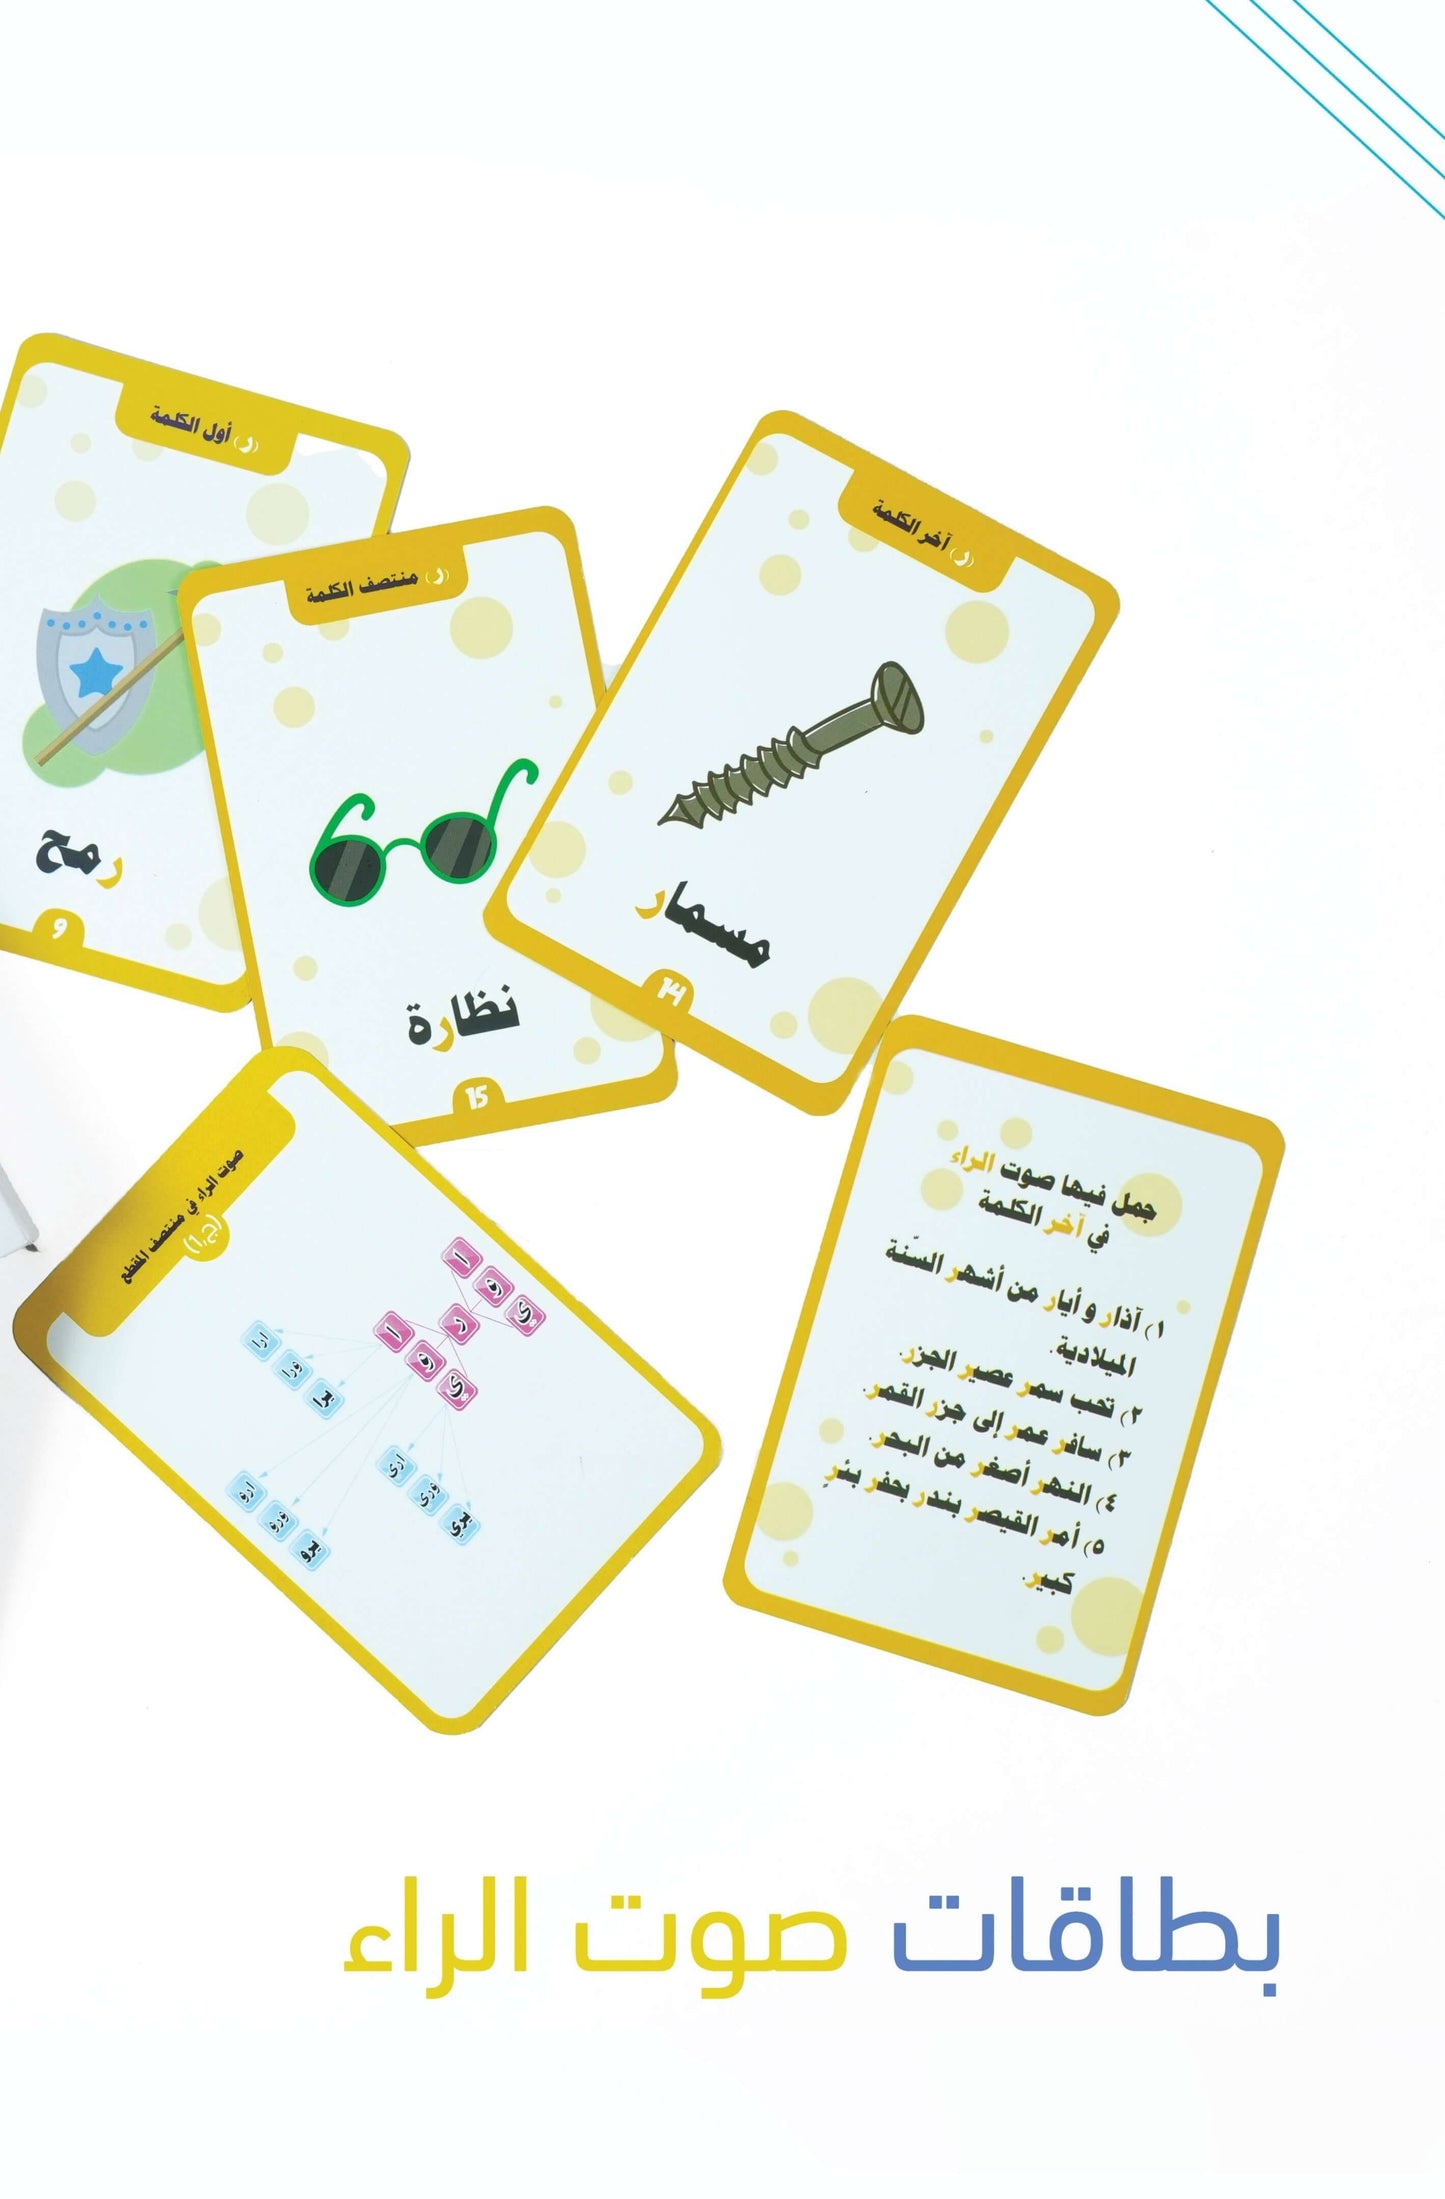 Articulation cards R in Arabic: Educational Flashcards - physical game for children